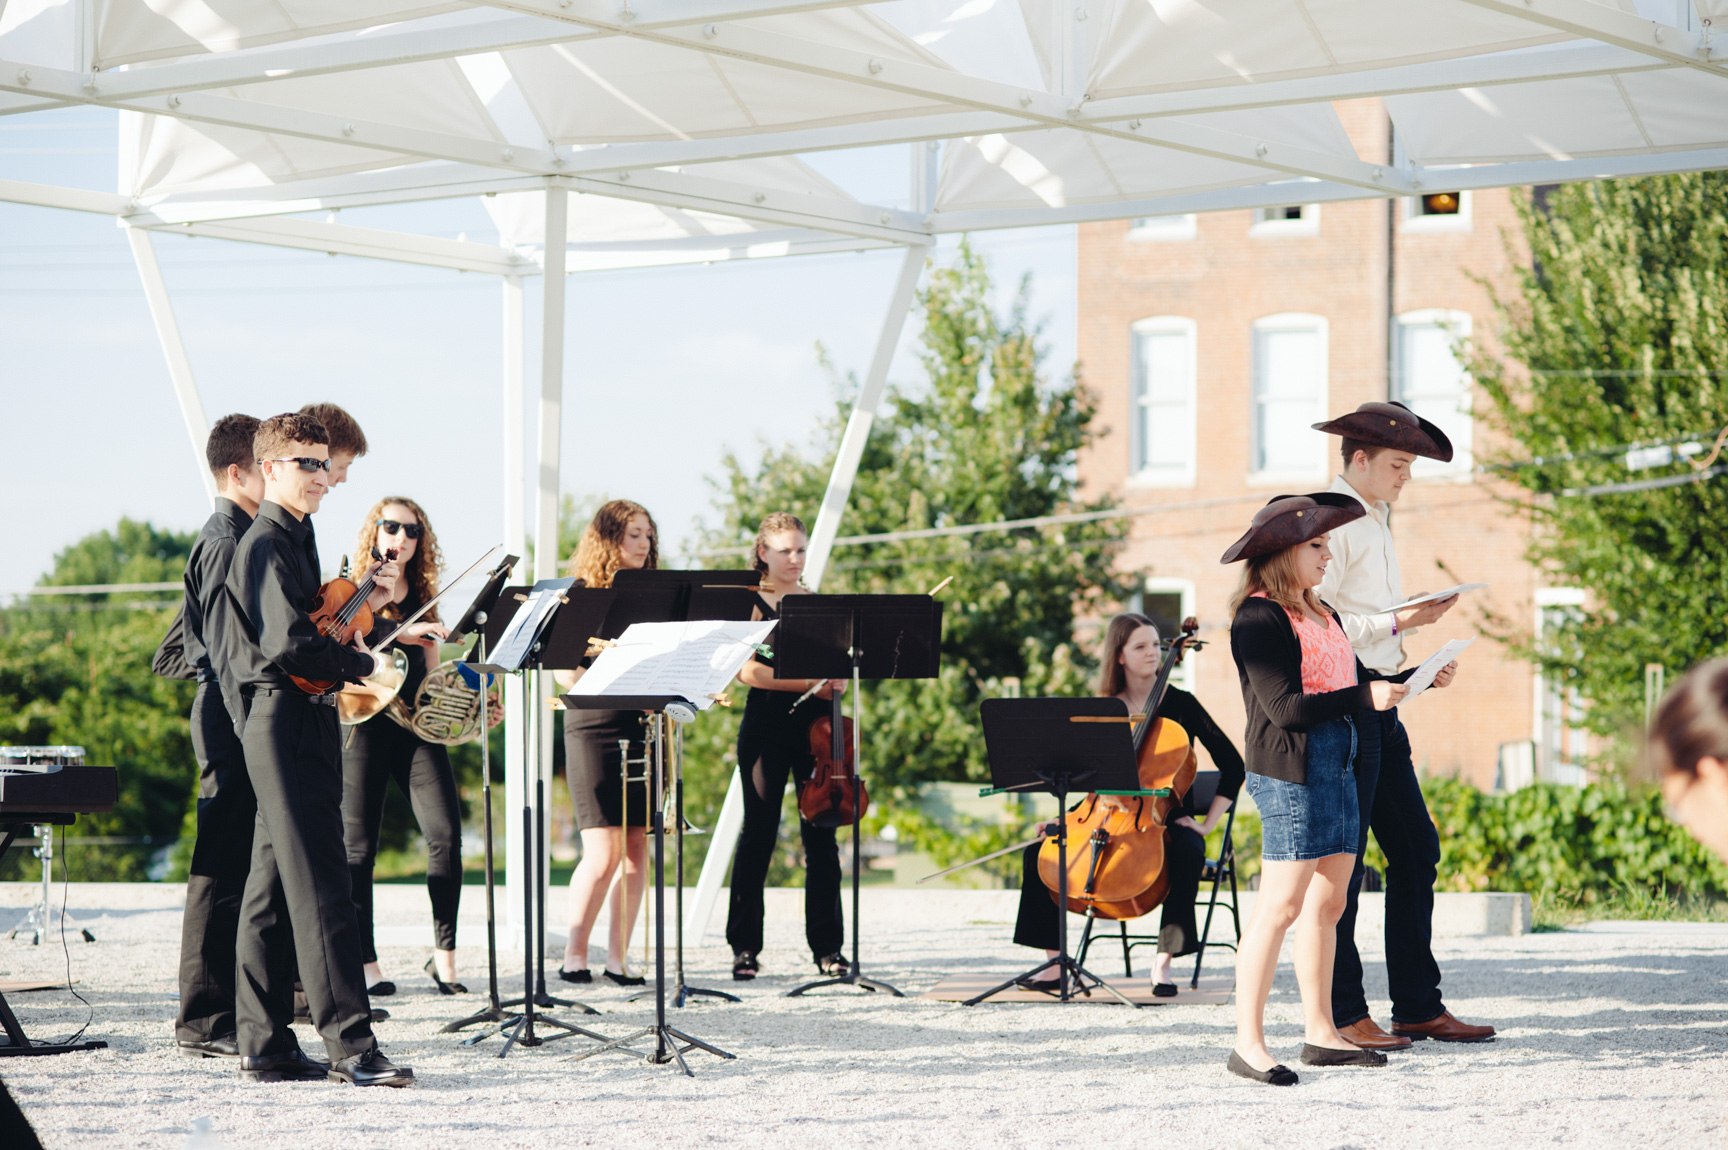 A group of student musicians in formal wear and two others wearing brown hats perform outdoors beneath a white geometric canopy installation.